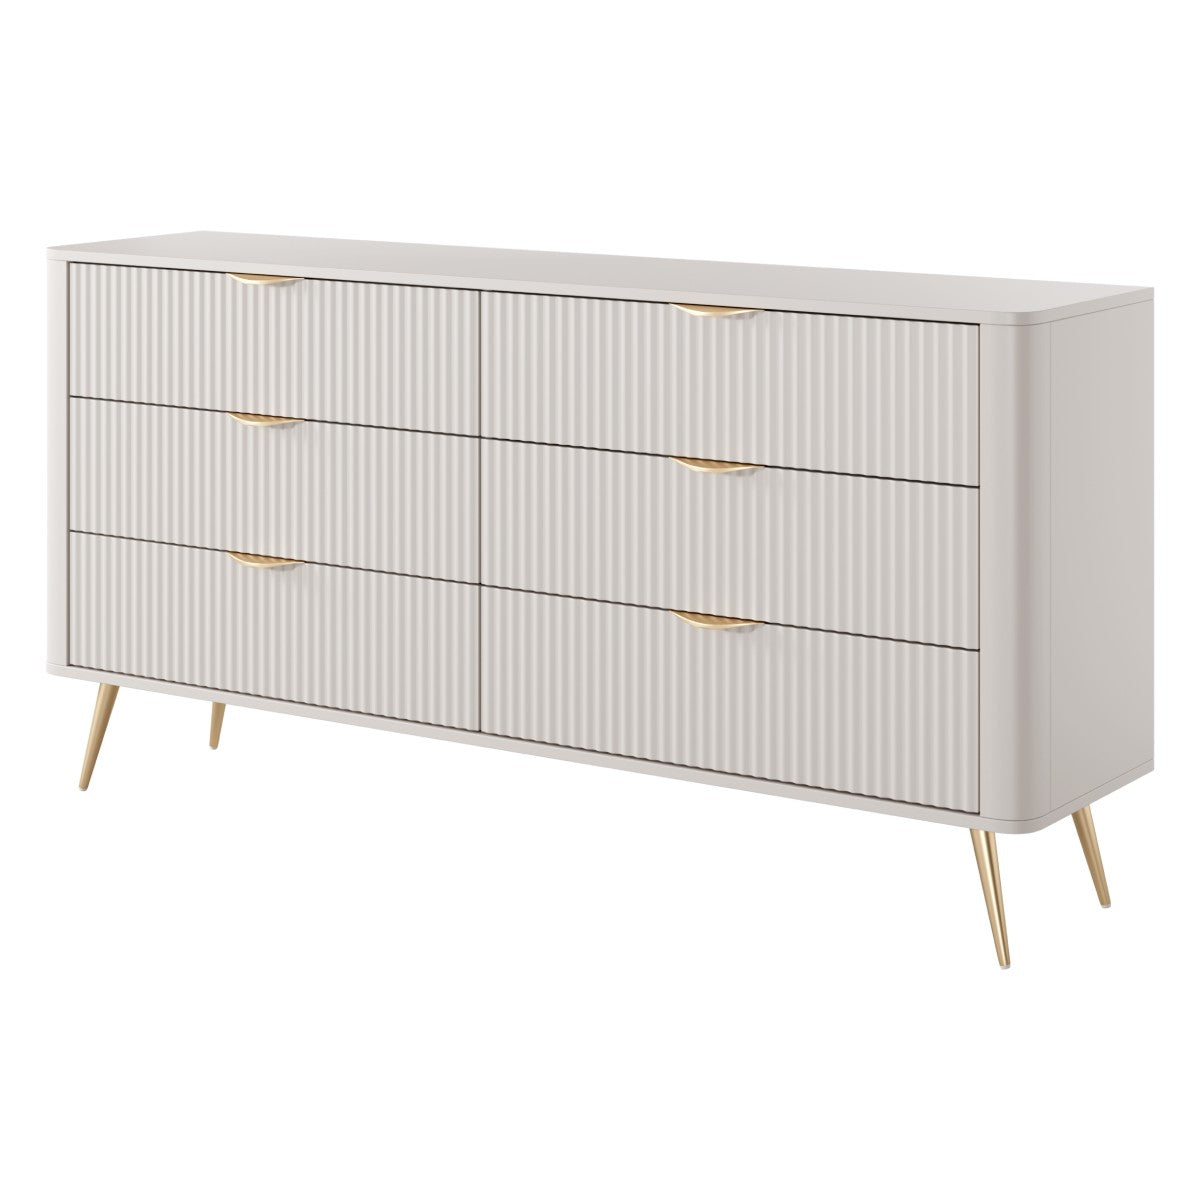 Chest of drawers LA5555